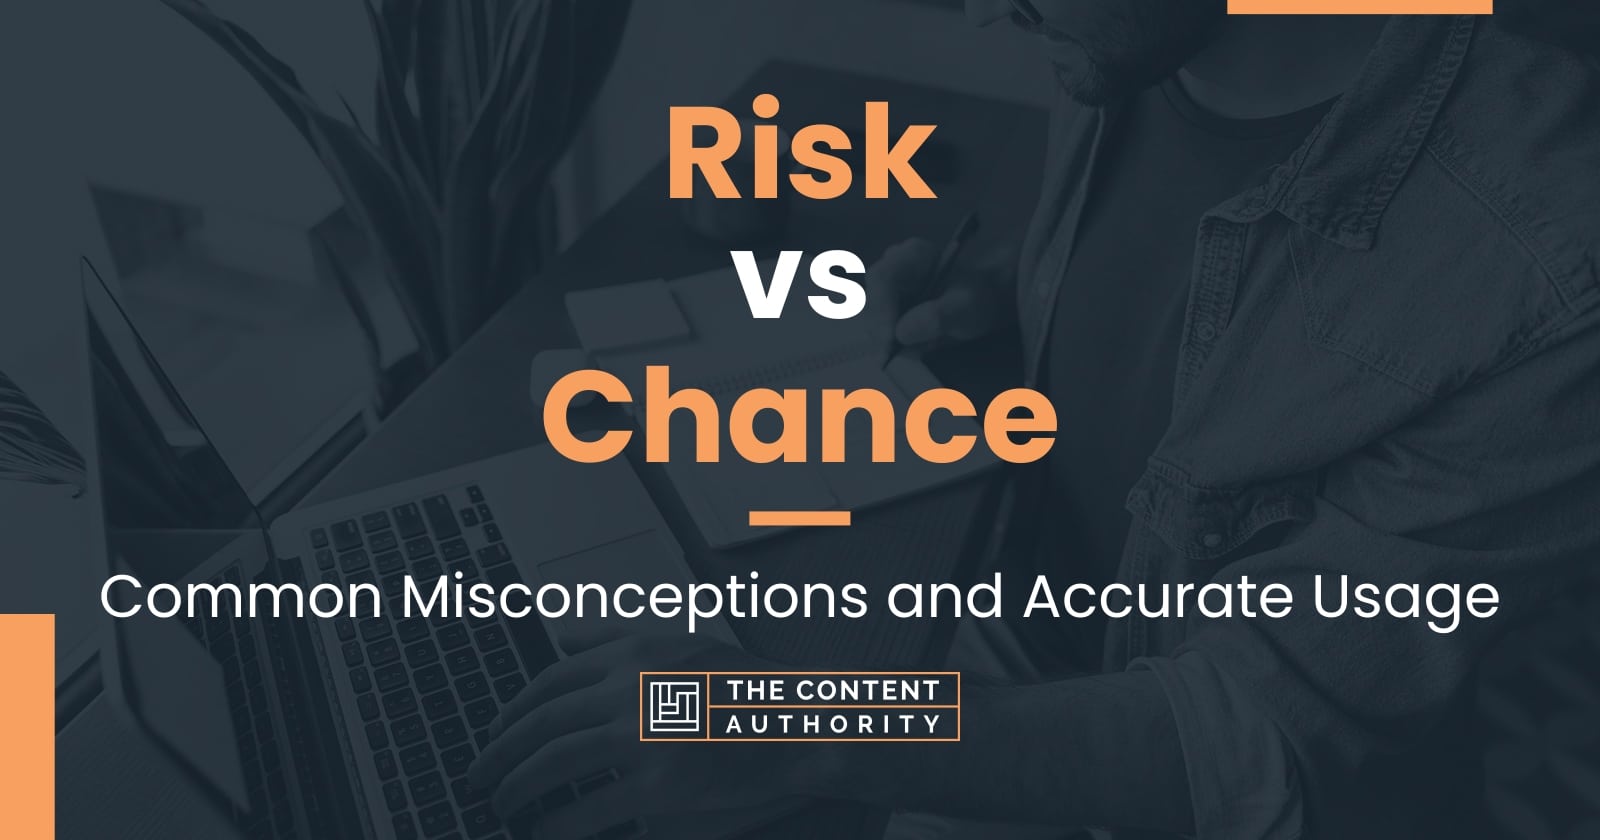 Risk vs Chance Common Misconceptions and Accurate Usage